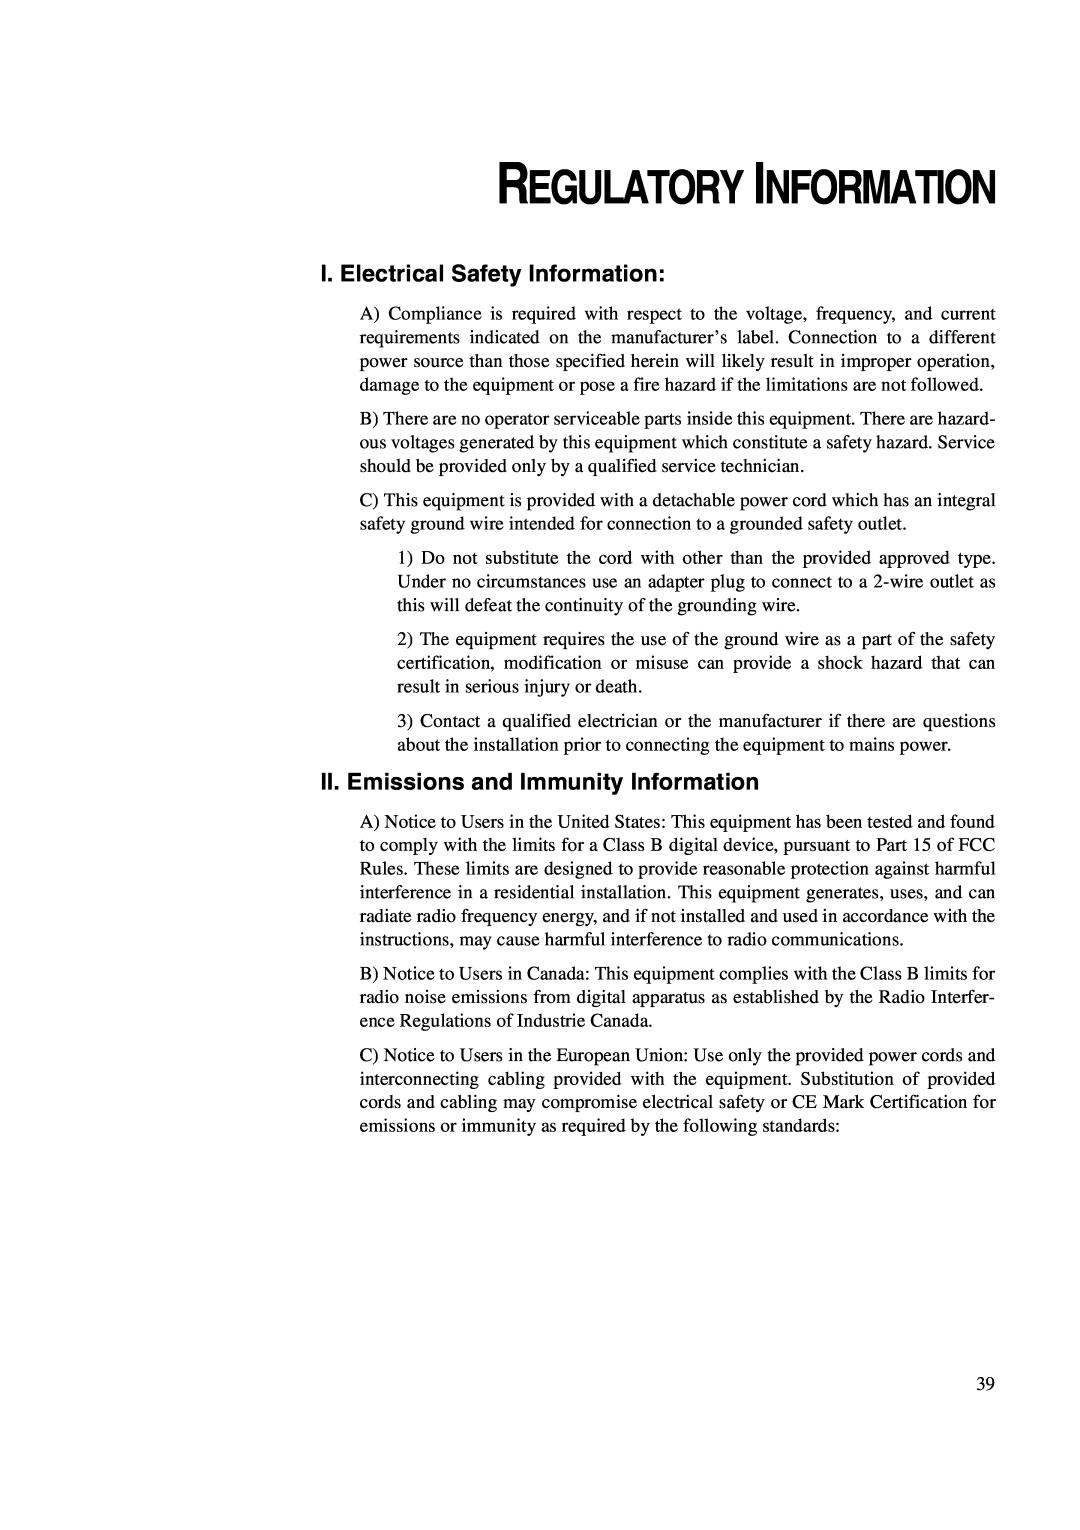 Tyco 1847L Series manual Regulatory Information, I. Electrical Safety Information, II. Emissions and Immunity Information 